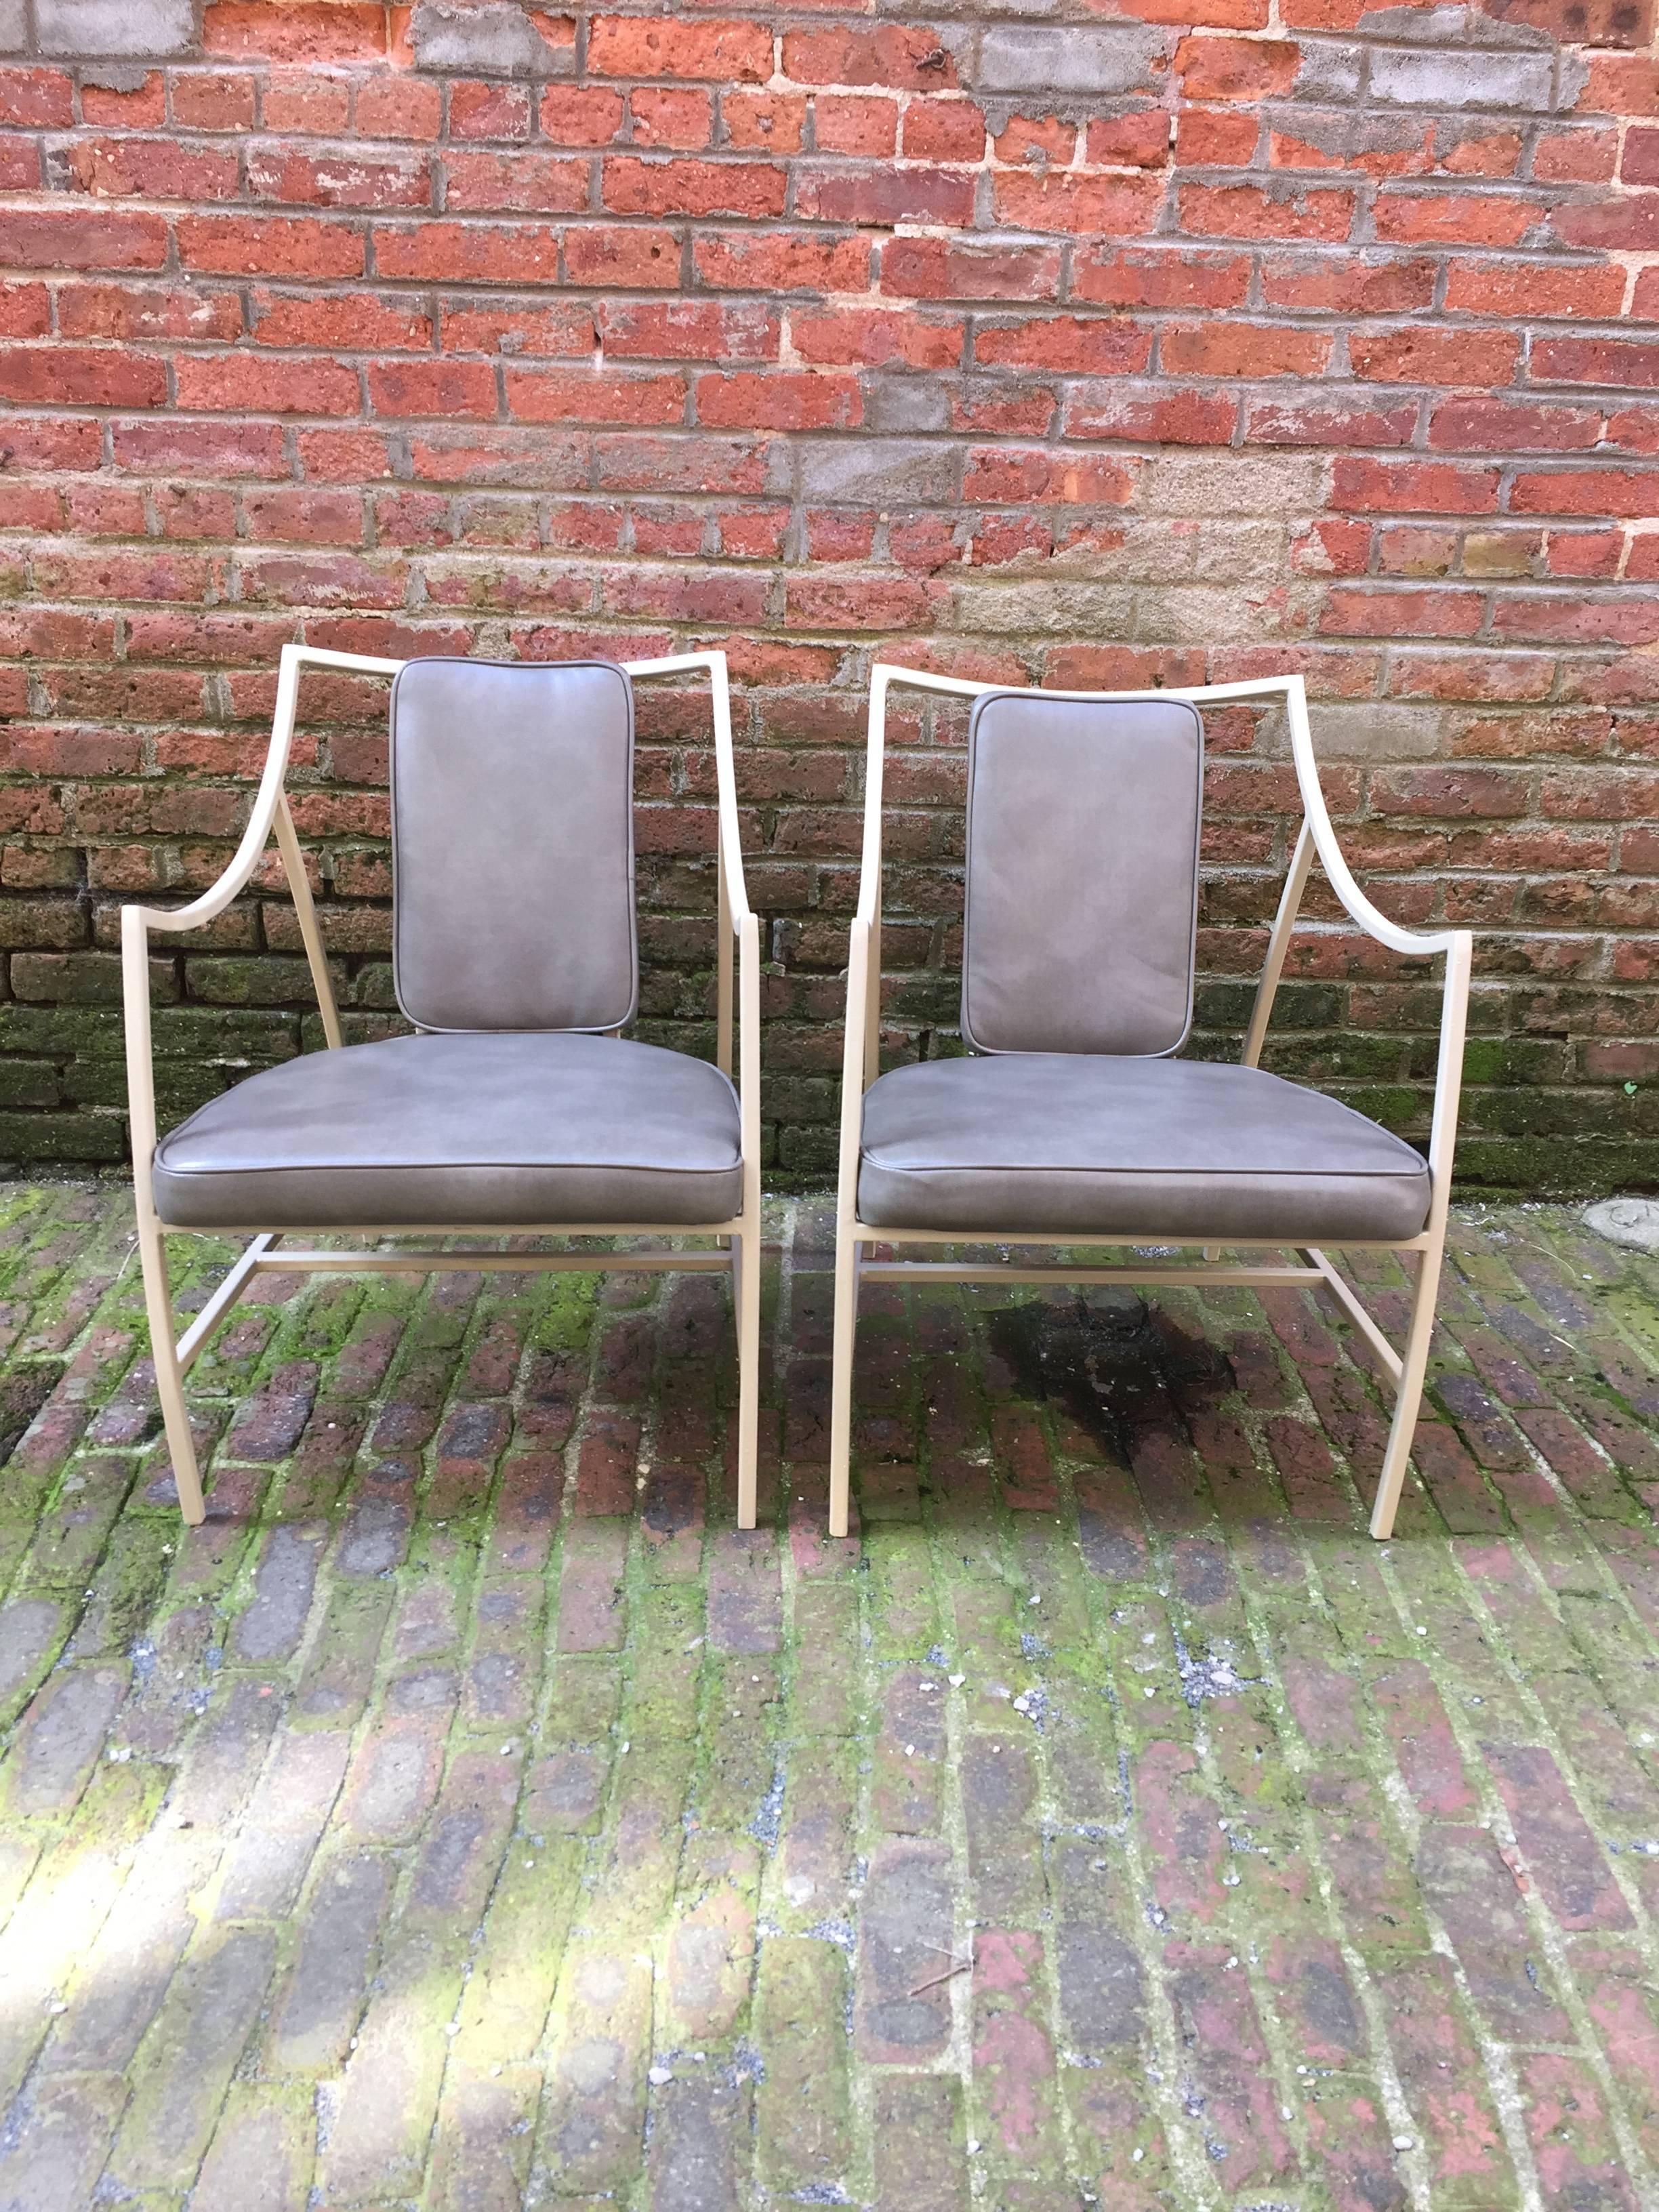 The pair can work either indoors or outdoors. Beautiful curvilinear frames with gray vinyl seats and backs. The frames are made of square tubular aluminum. The seats and back are in a gray vinyl. The Holiday line designed by Kipp Stewart and Stewart